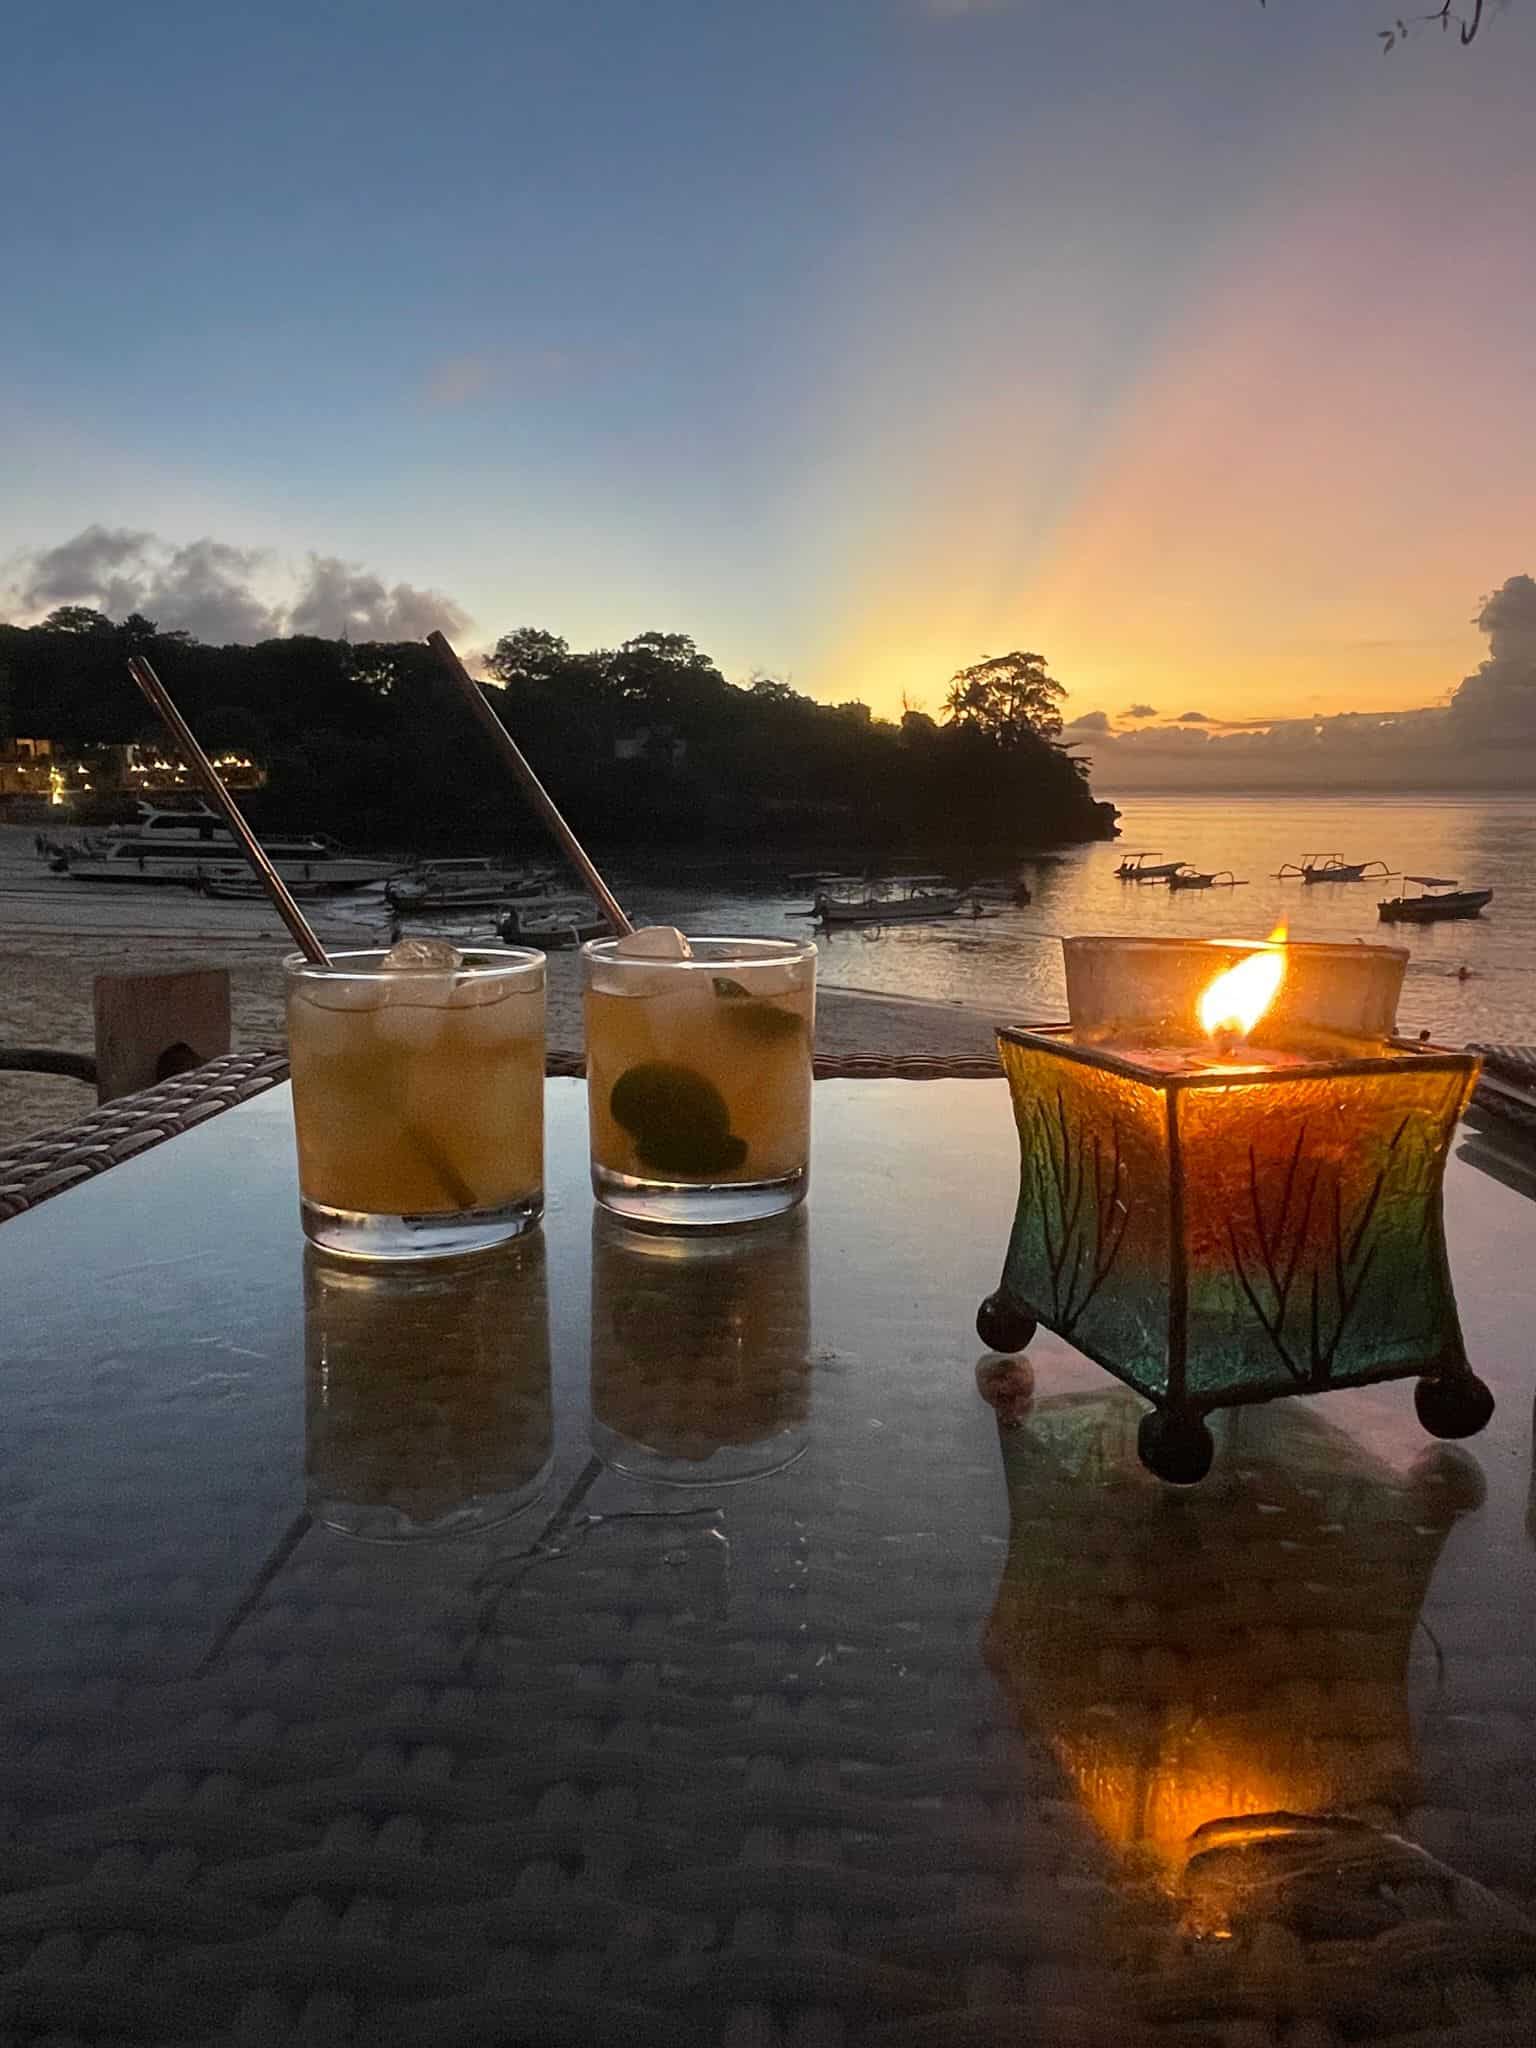 Candles at sunset by the sea in Nusa Lembongan, Indonesia